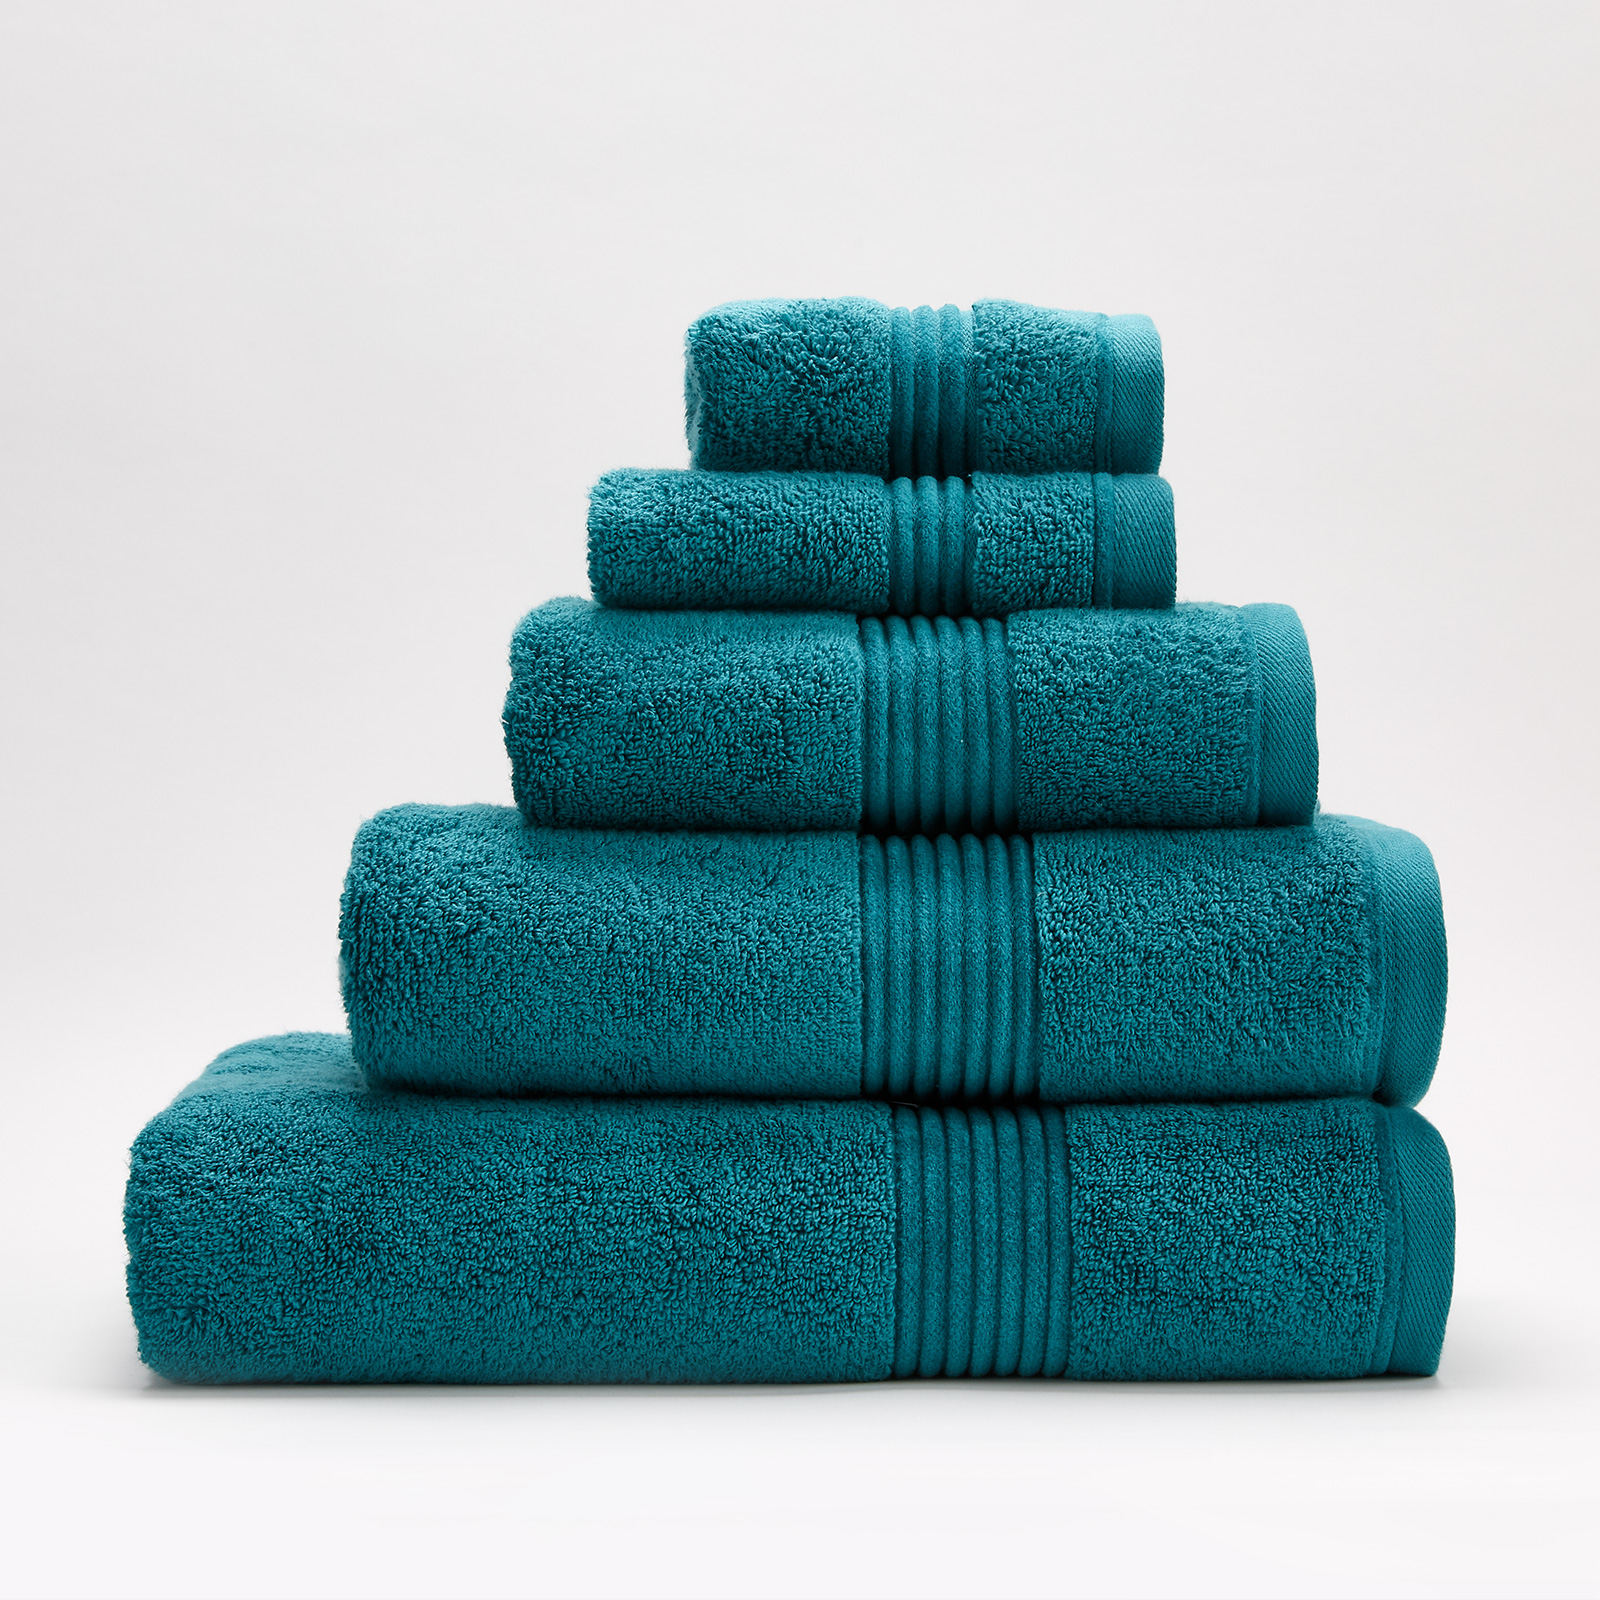 So Soft Towel Teal Blue - Catherine Lansfield